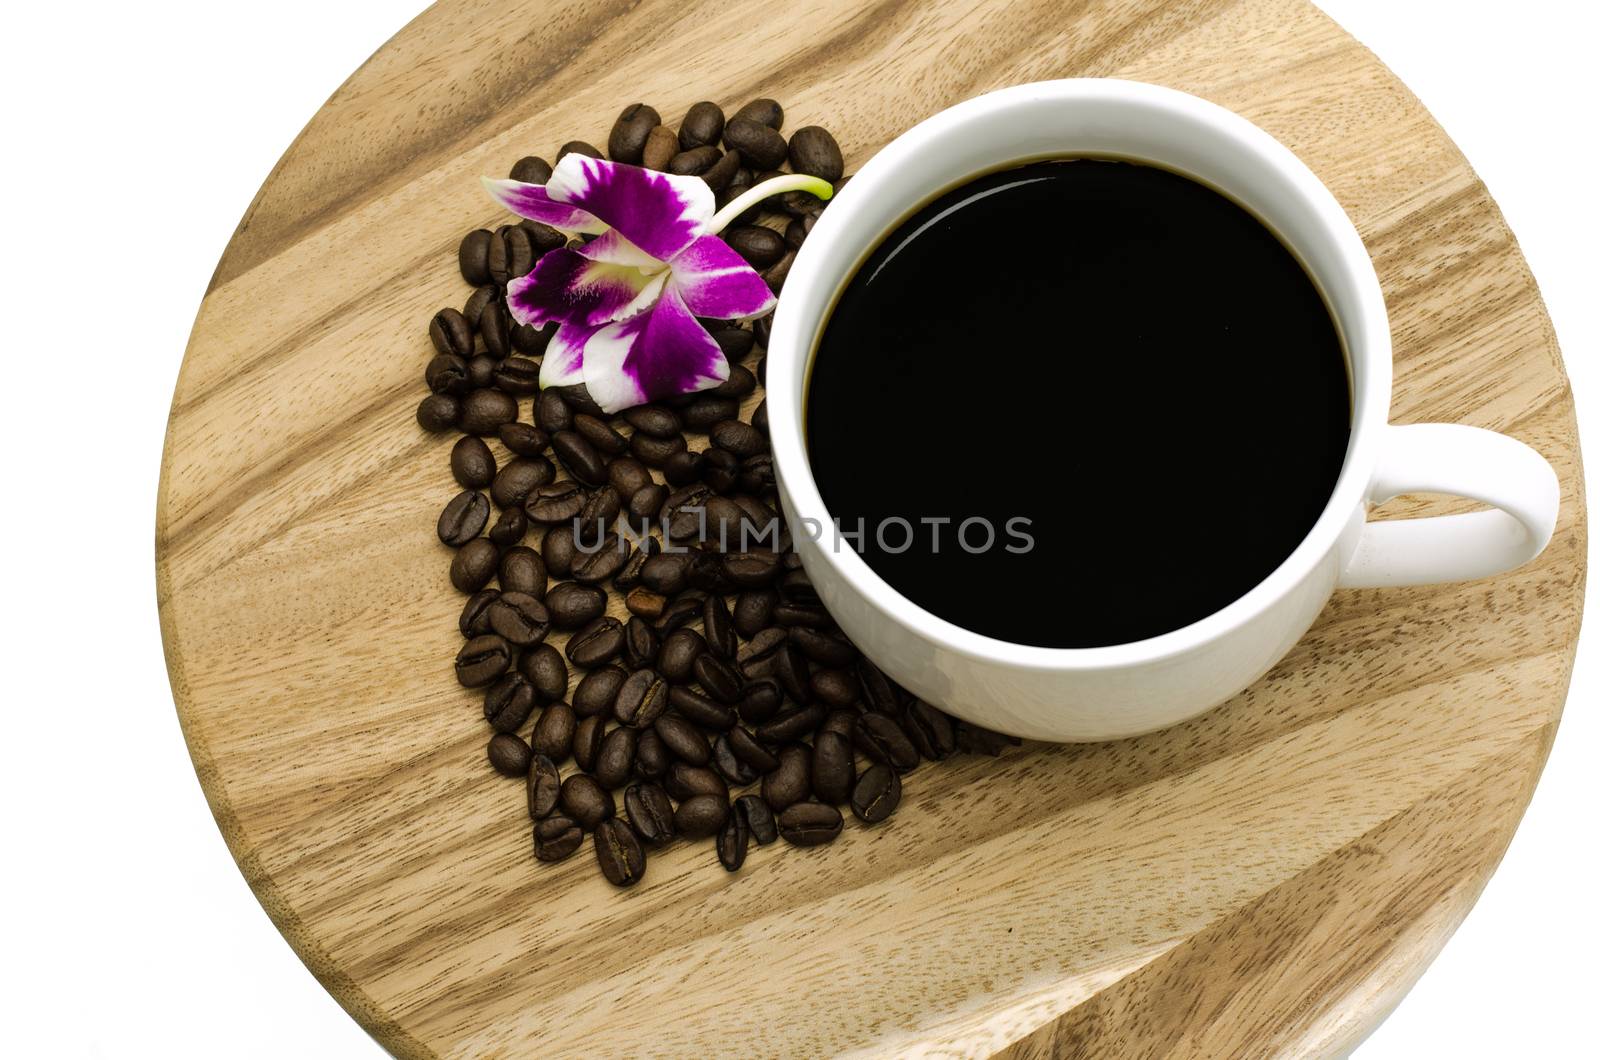 Coffee cup and coffee beans on wooden background